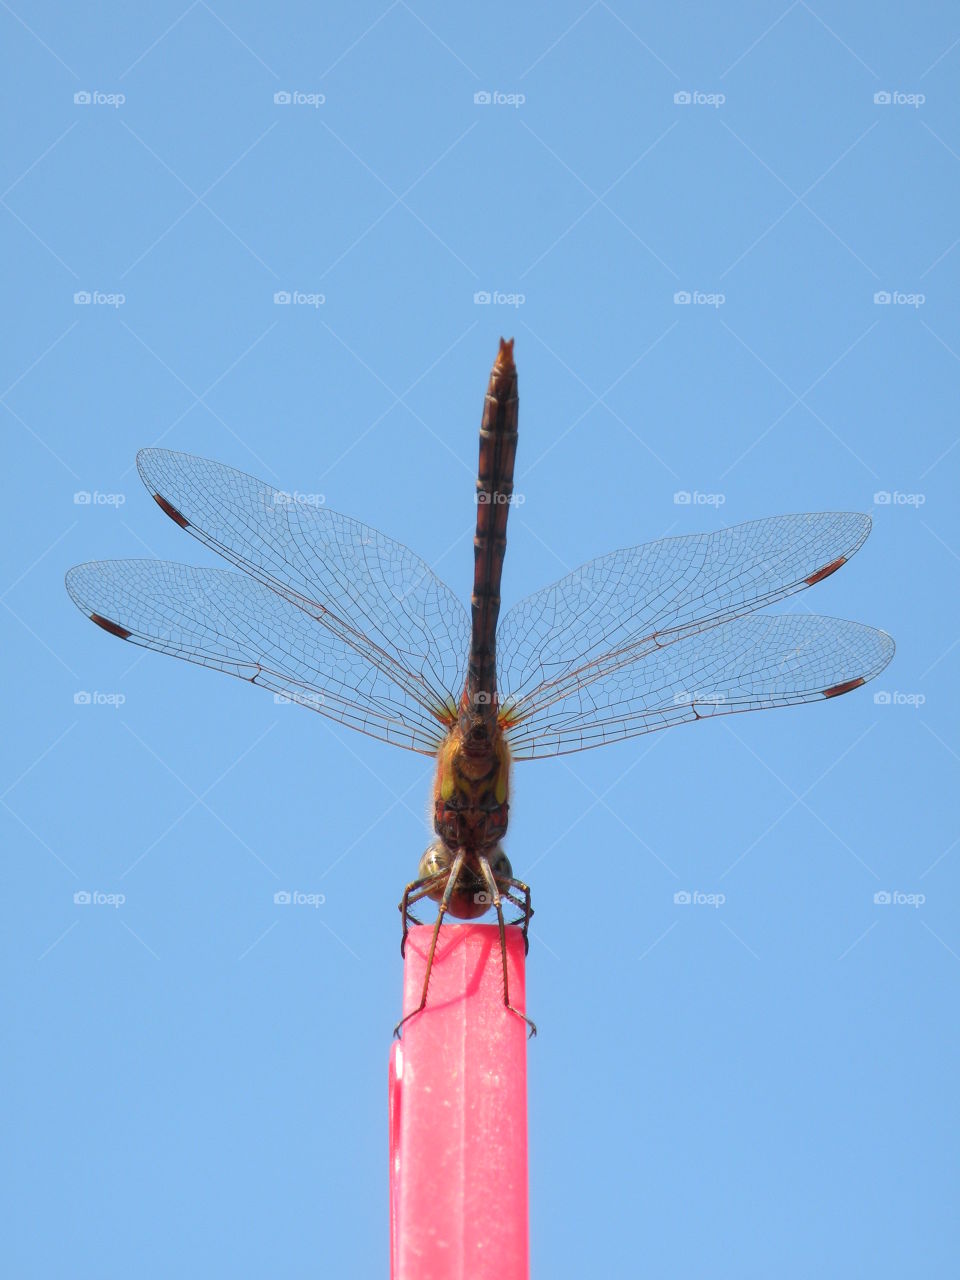 Dragonfly, Sky, No Person, Nature, Outdoors